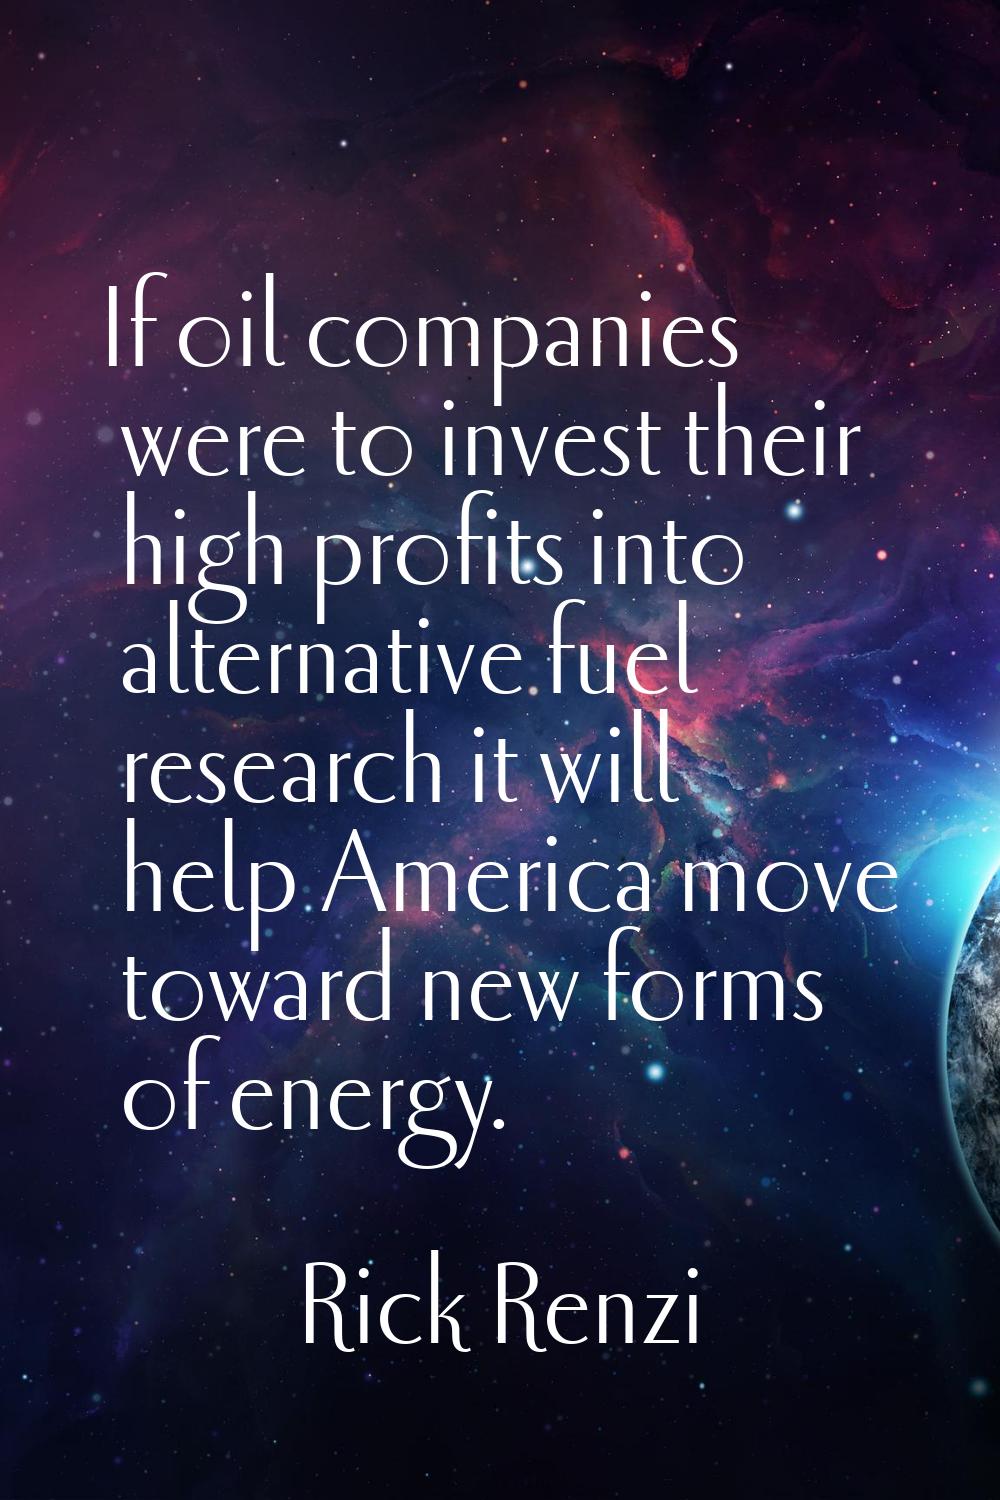 If oil companies were to invest their high profits into alternative fuel research it will help Amer